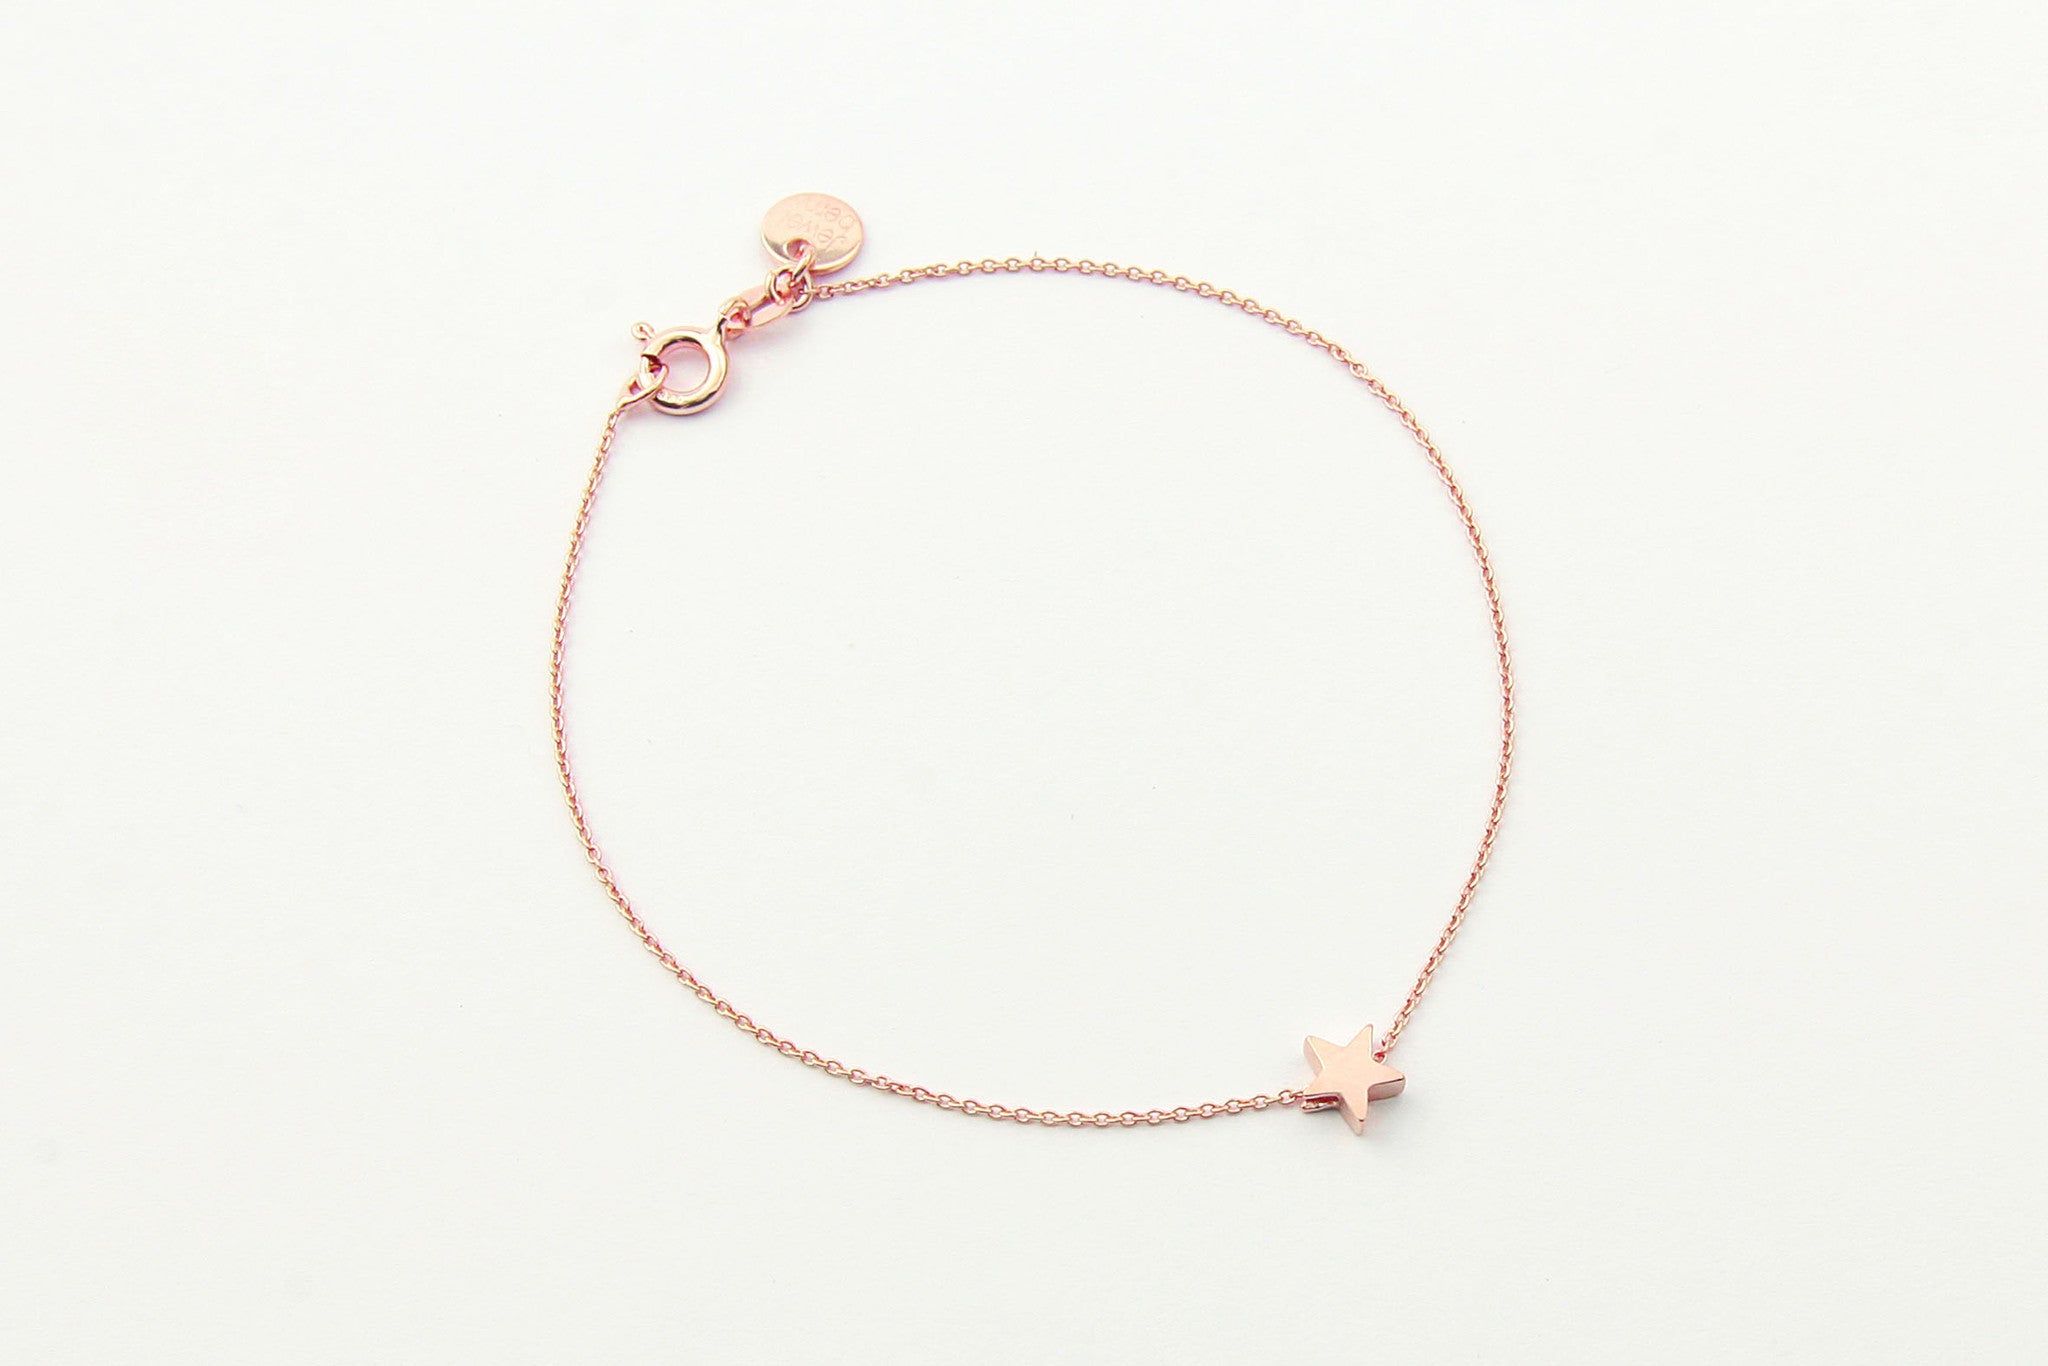 jewelberry armband bracelet little star rose gold plated sterling silver fine jewelry handmade with love fairtrade anchor chain